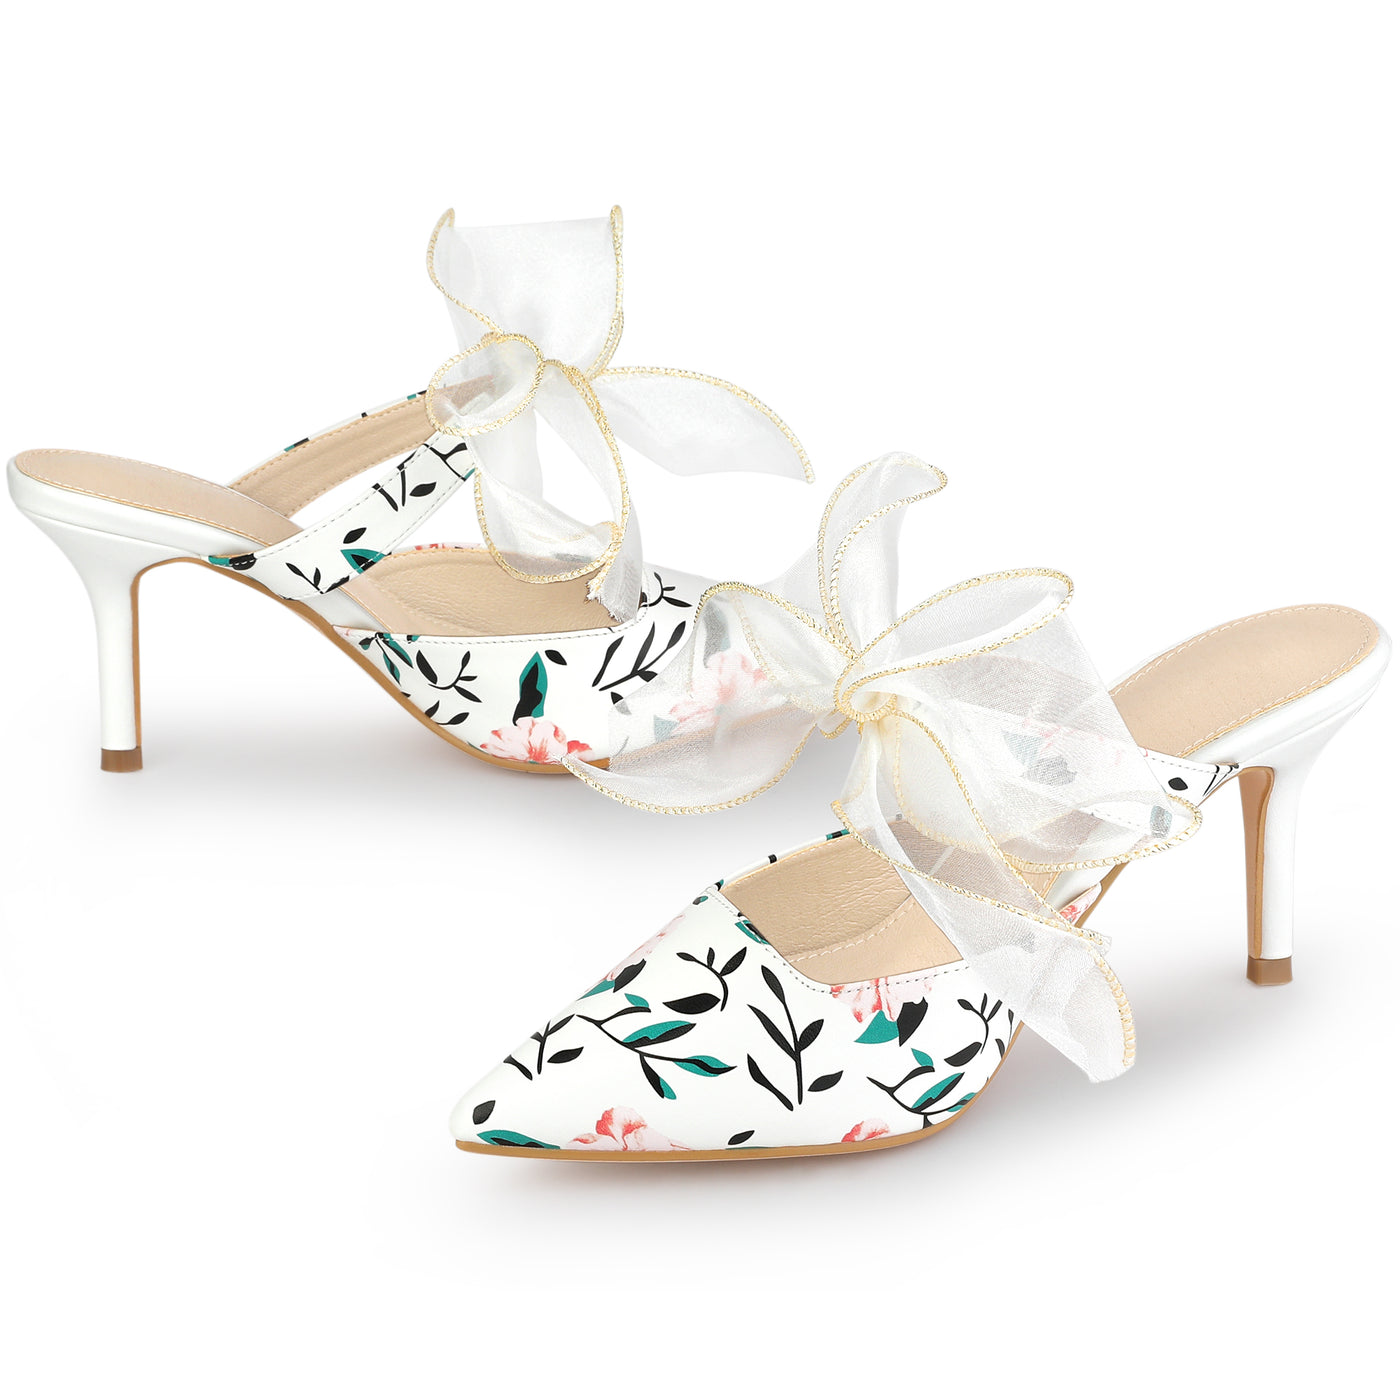 Allegra K Women's Pointed Toe Lace Bow Floral Printed Stiletto Heels Mules